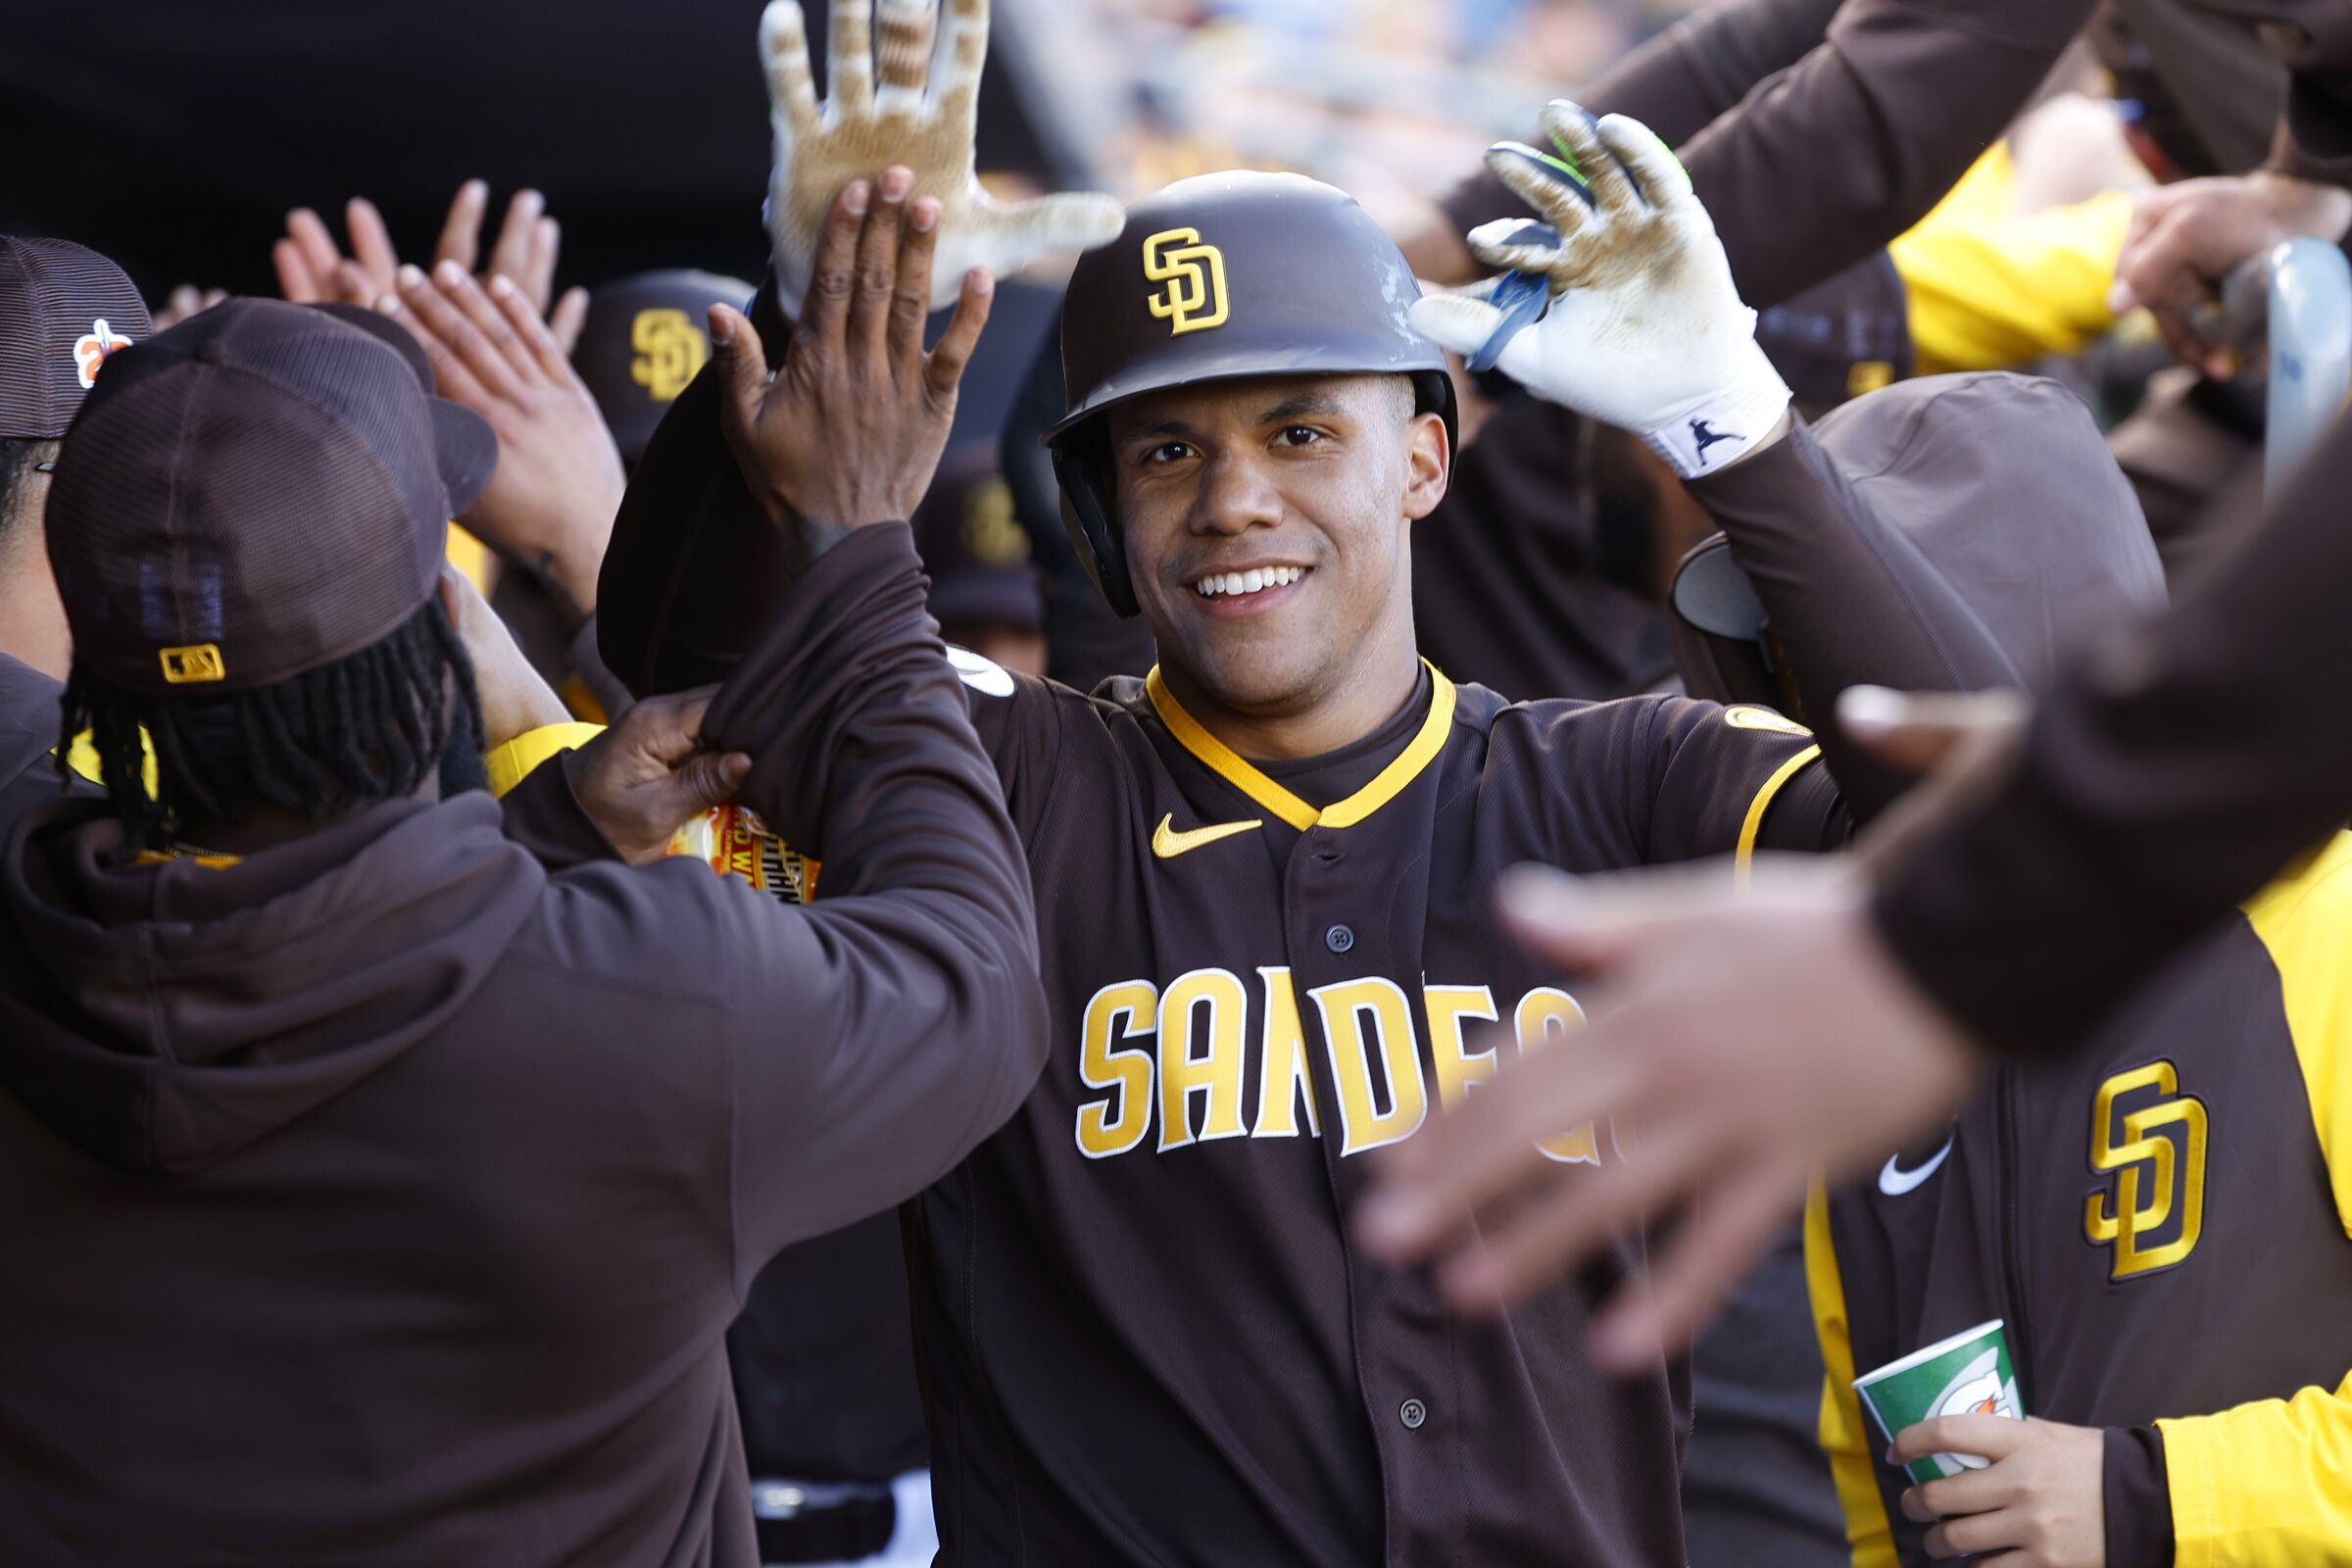 San Diego Padres' Juan Soto celebrates after a home run during a spring training game.